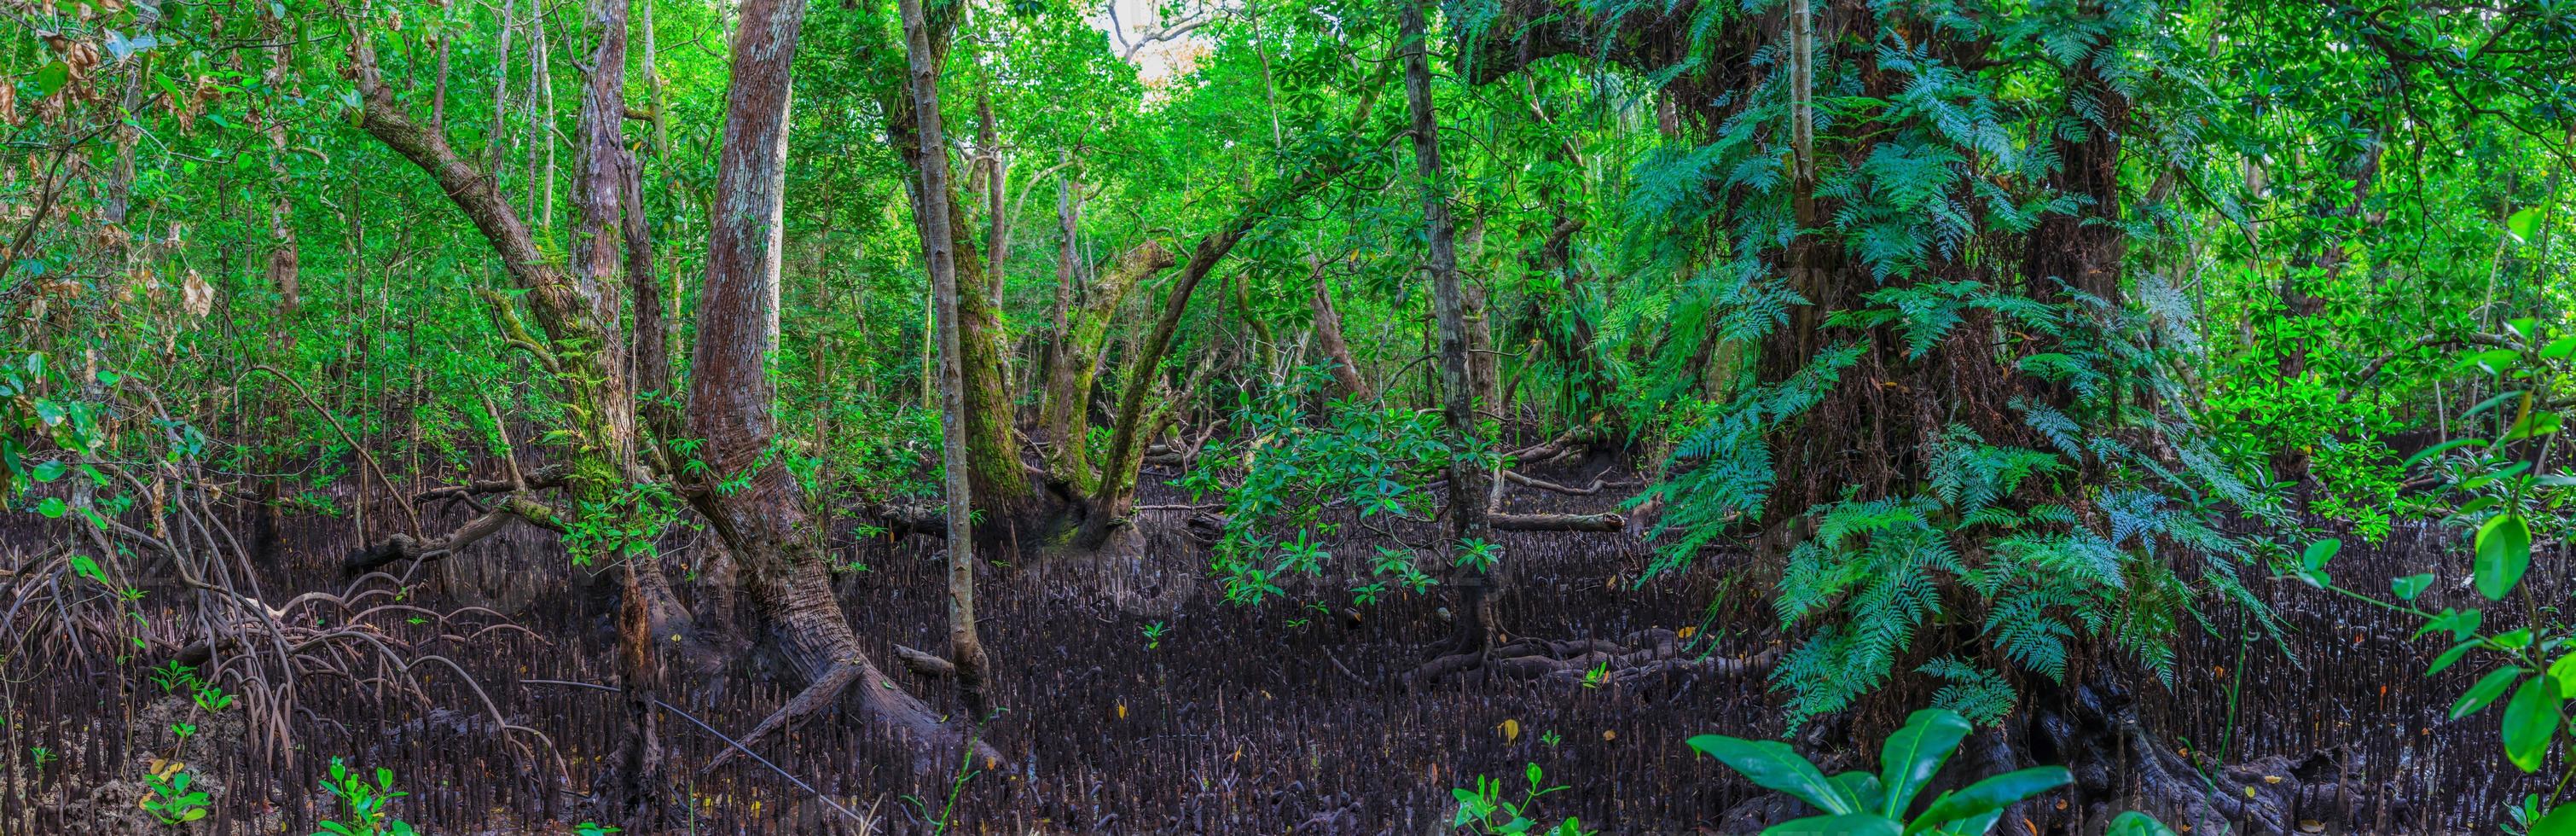 Panorama picture inside a jungle wood photo